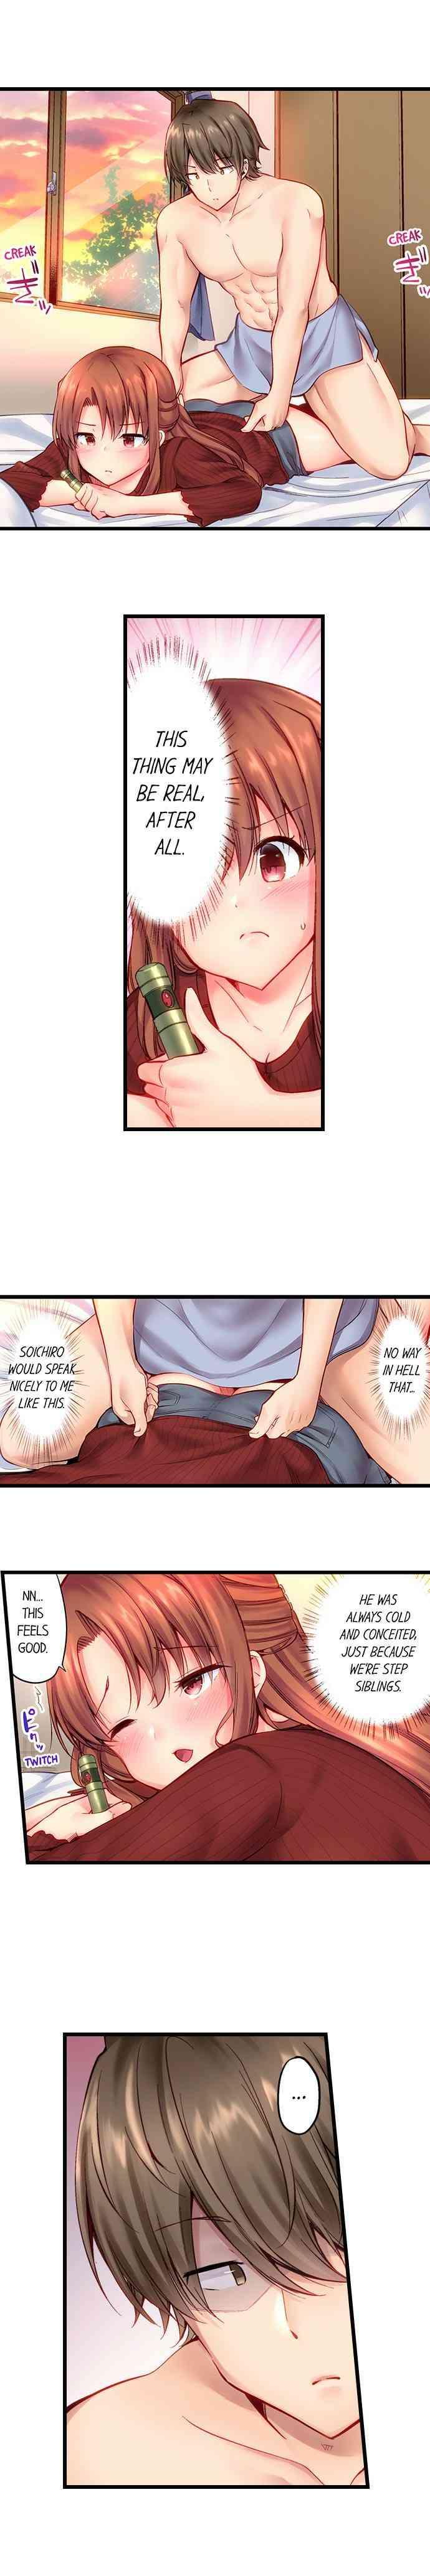 "Hypnotized" Sex with My Brother Ch.21/? 9